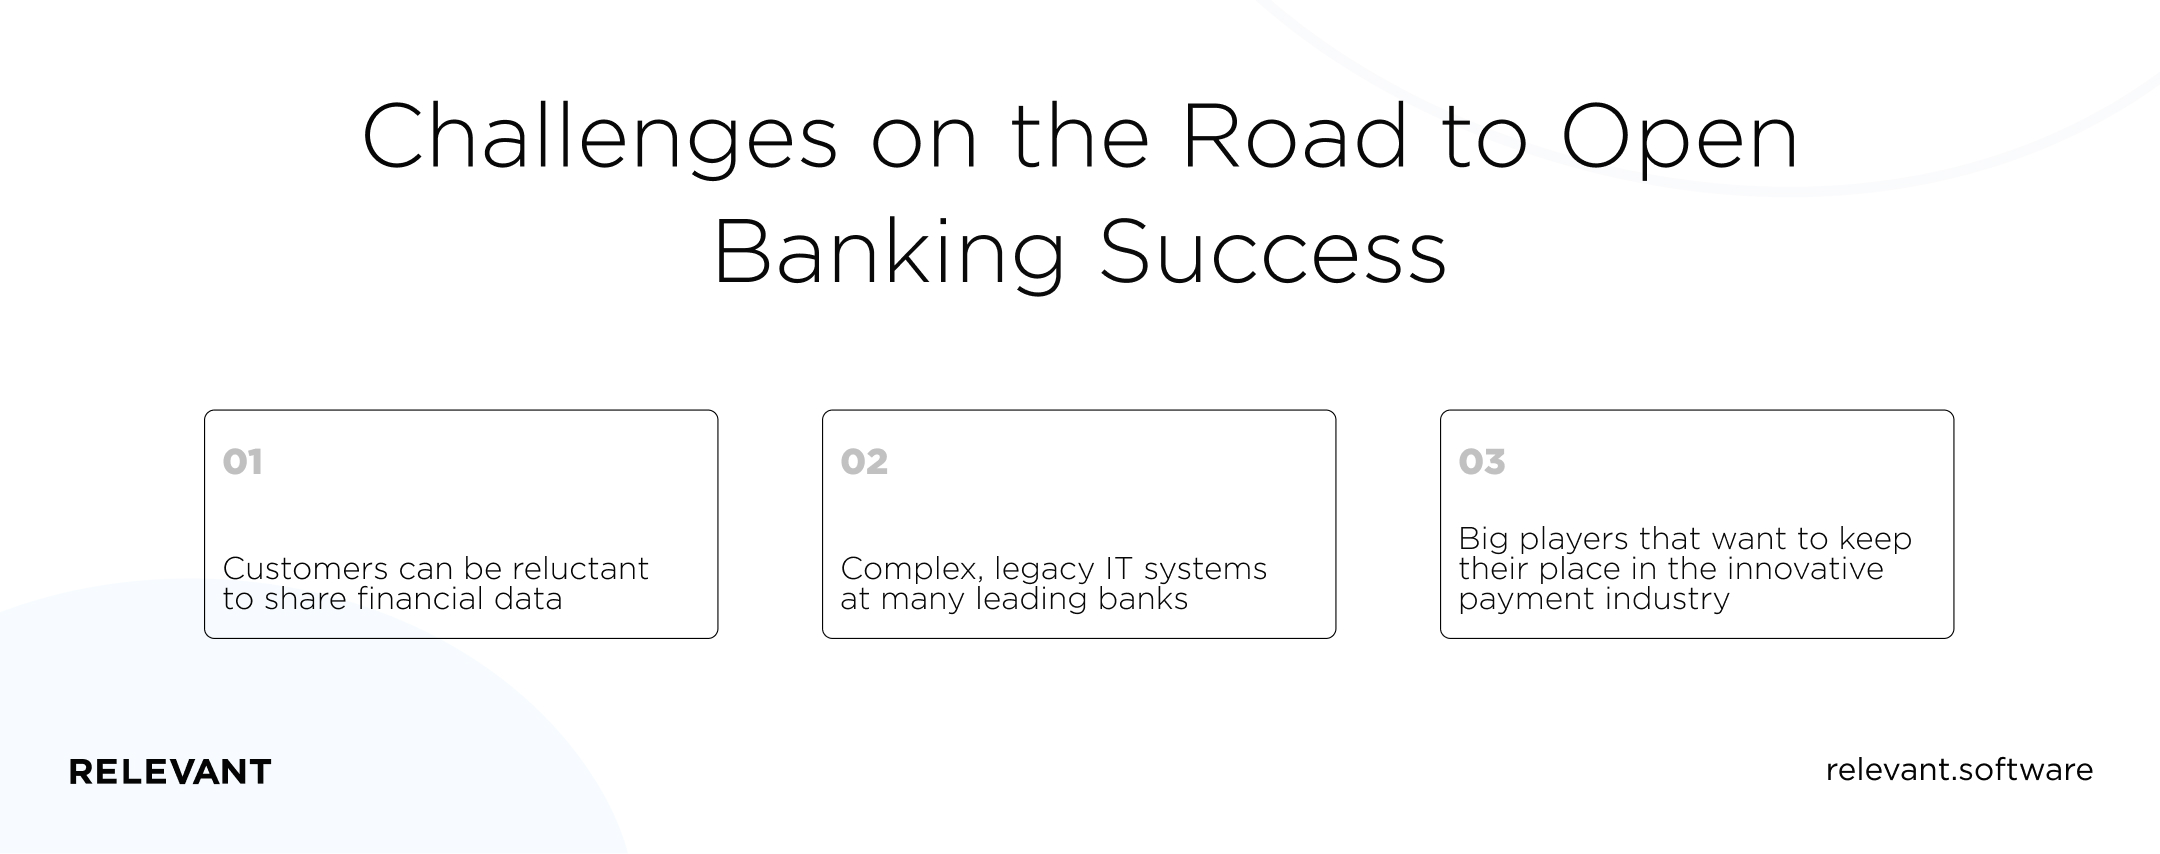 Challenges on the Road to Open Banking Success